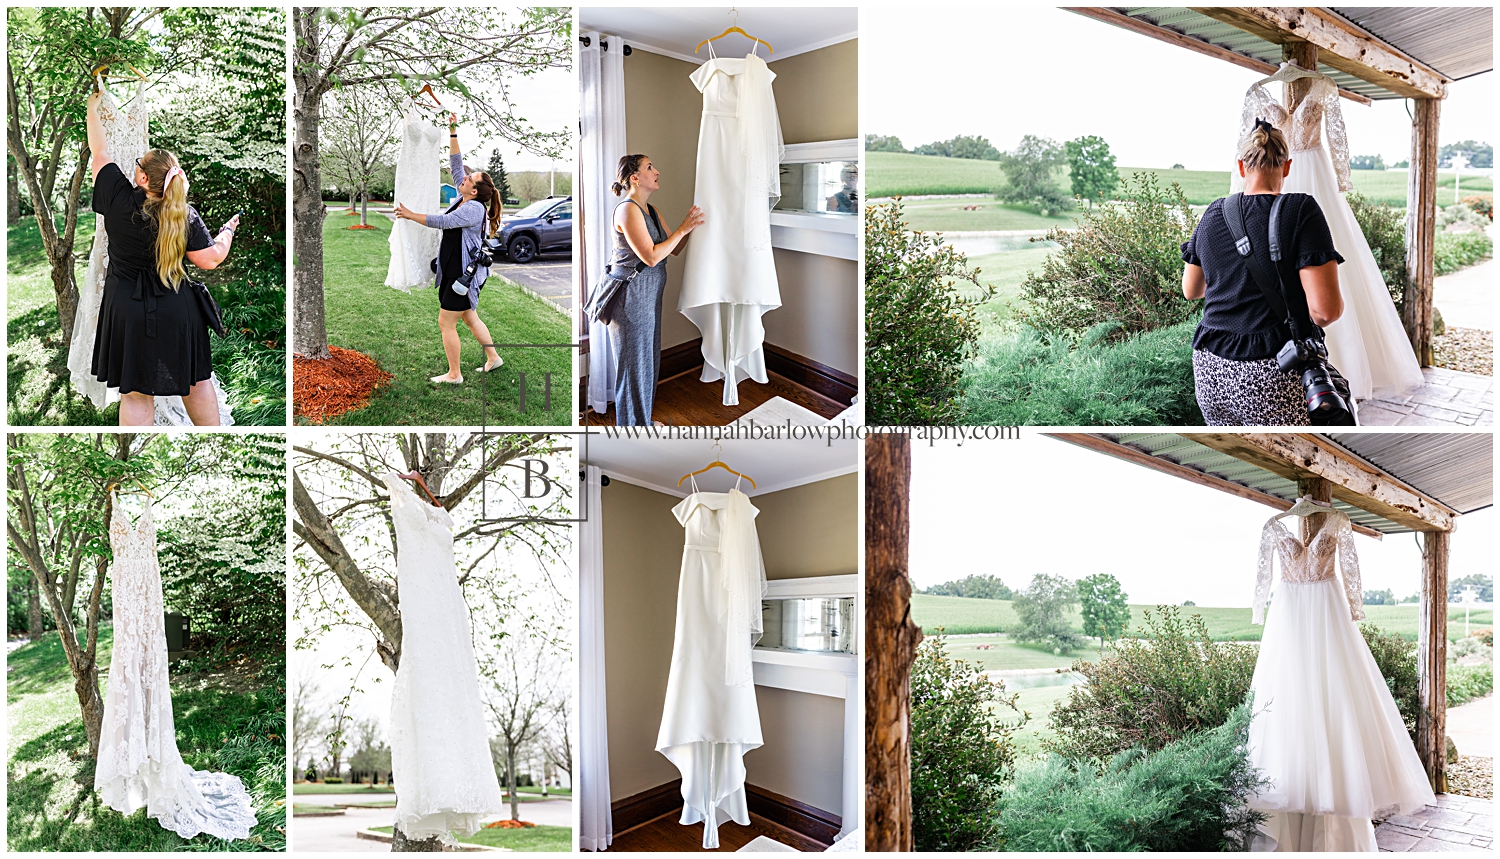 Wedding assistants hang dresses on trees and walls for photo.